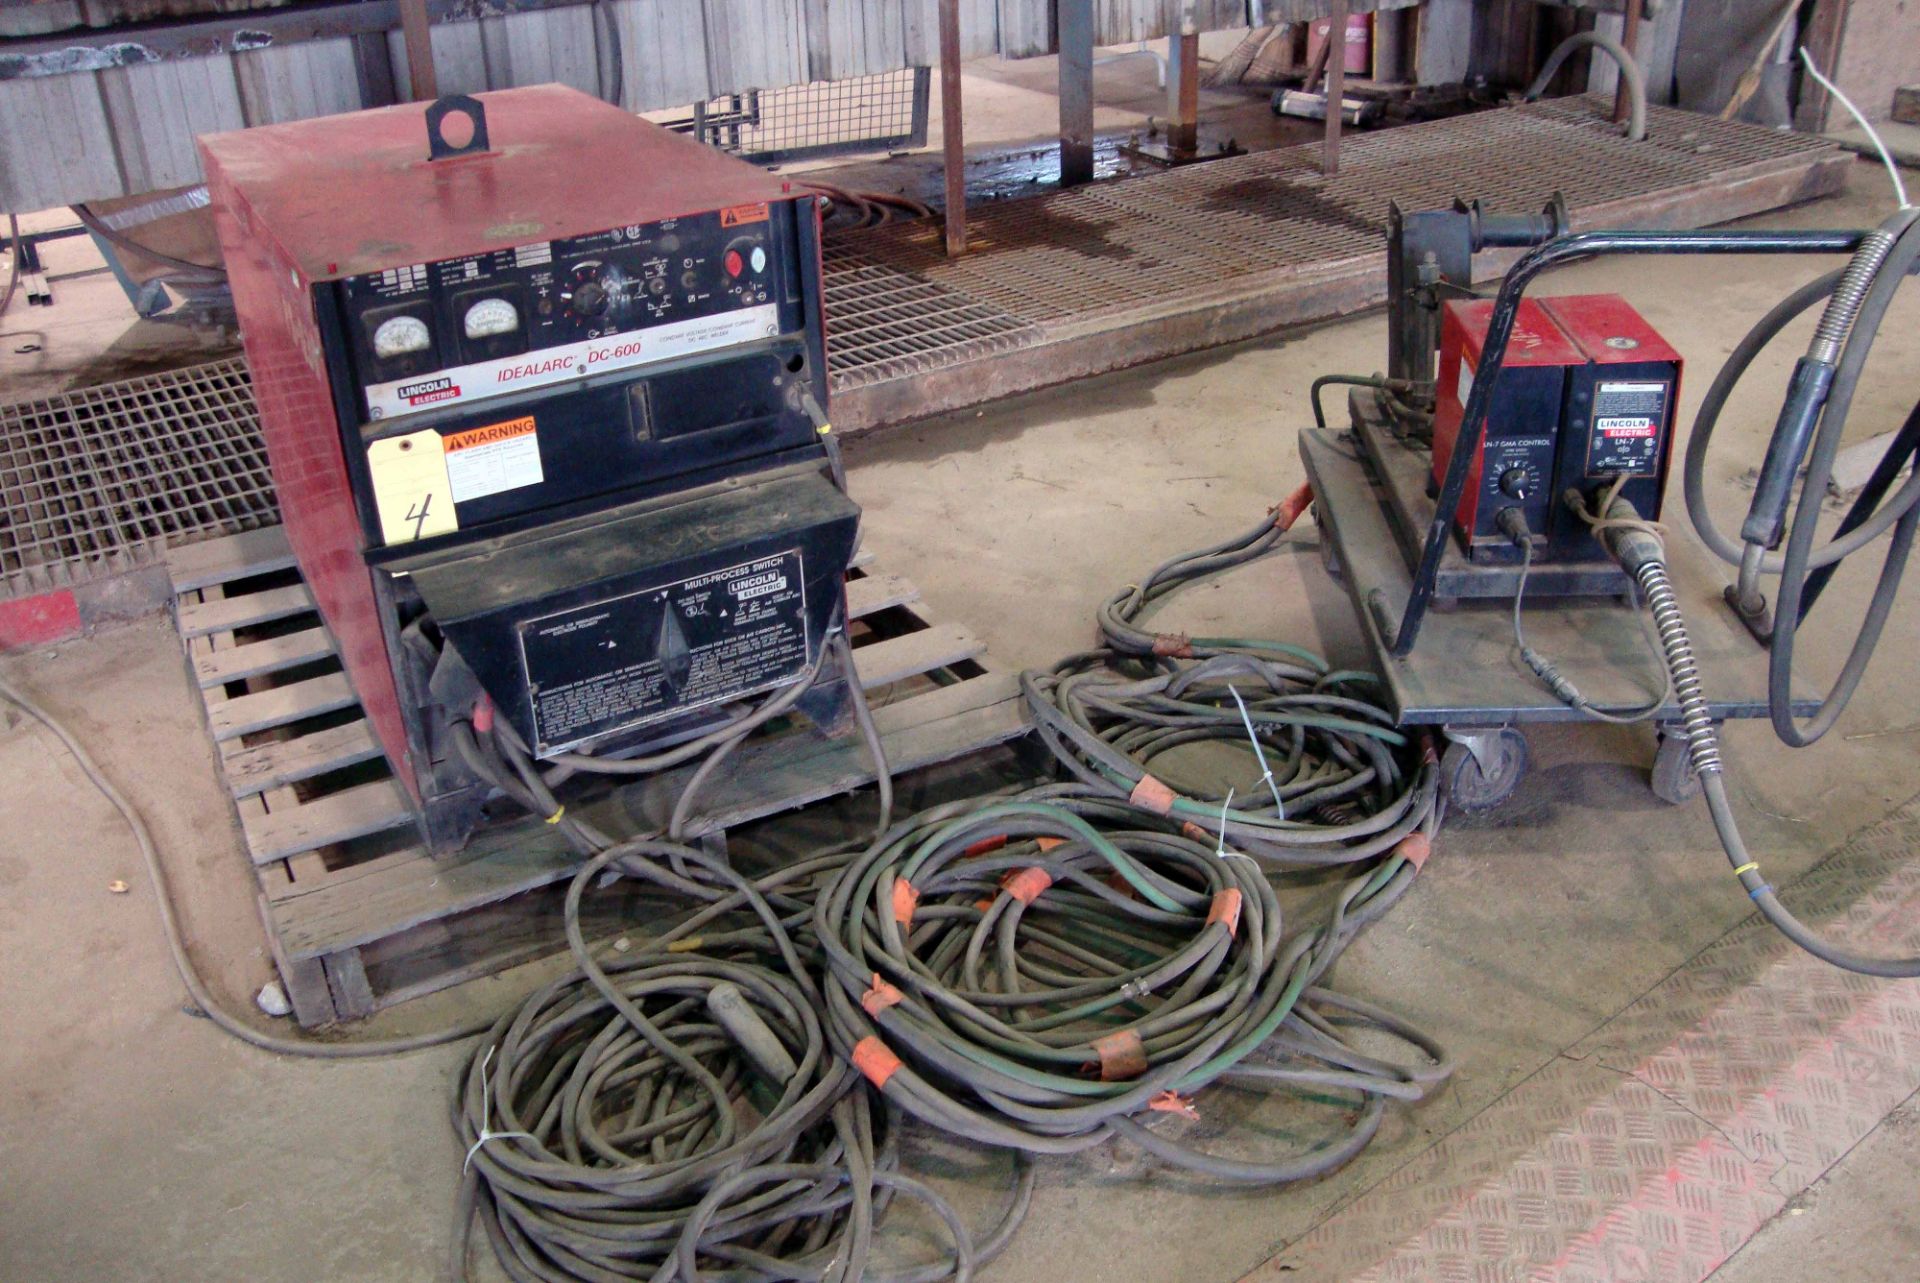 MIG WELDER, LINCOLN MDL. DC600,600 amps @ 44 v., 100% duty cycle, Lincoln Mdl. LN7 wire feeder,